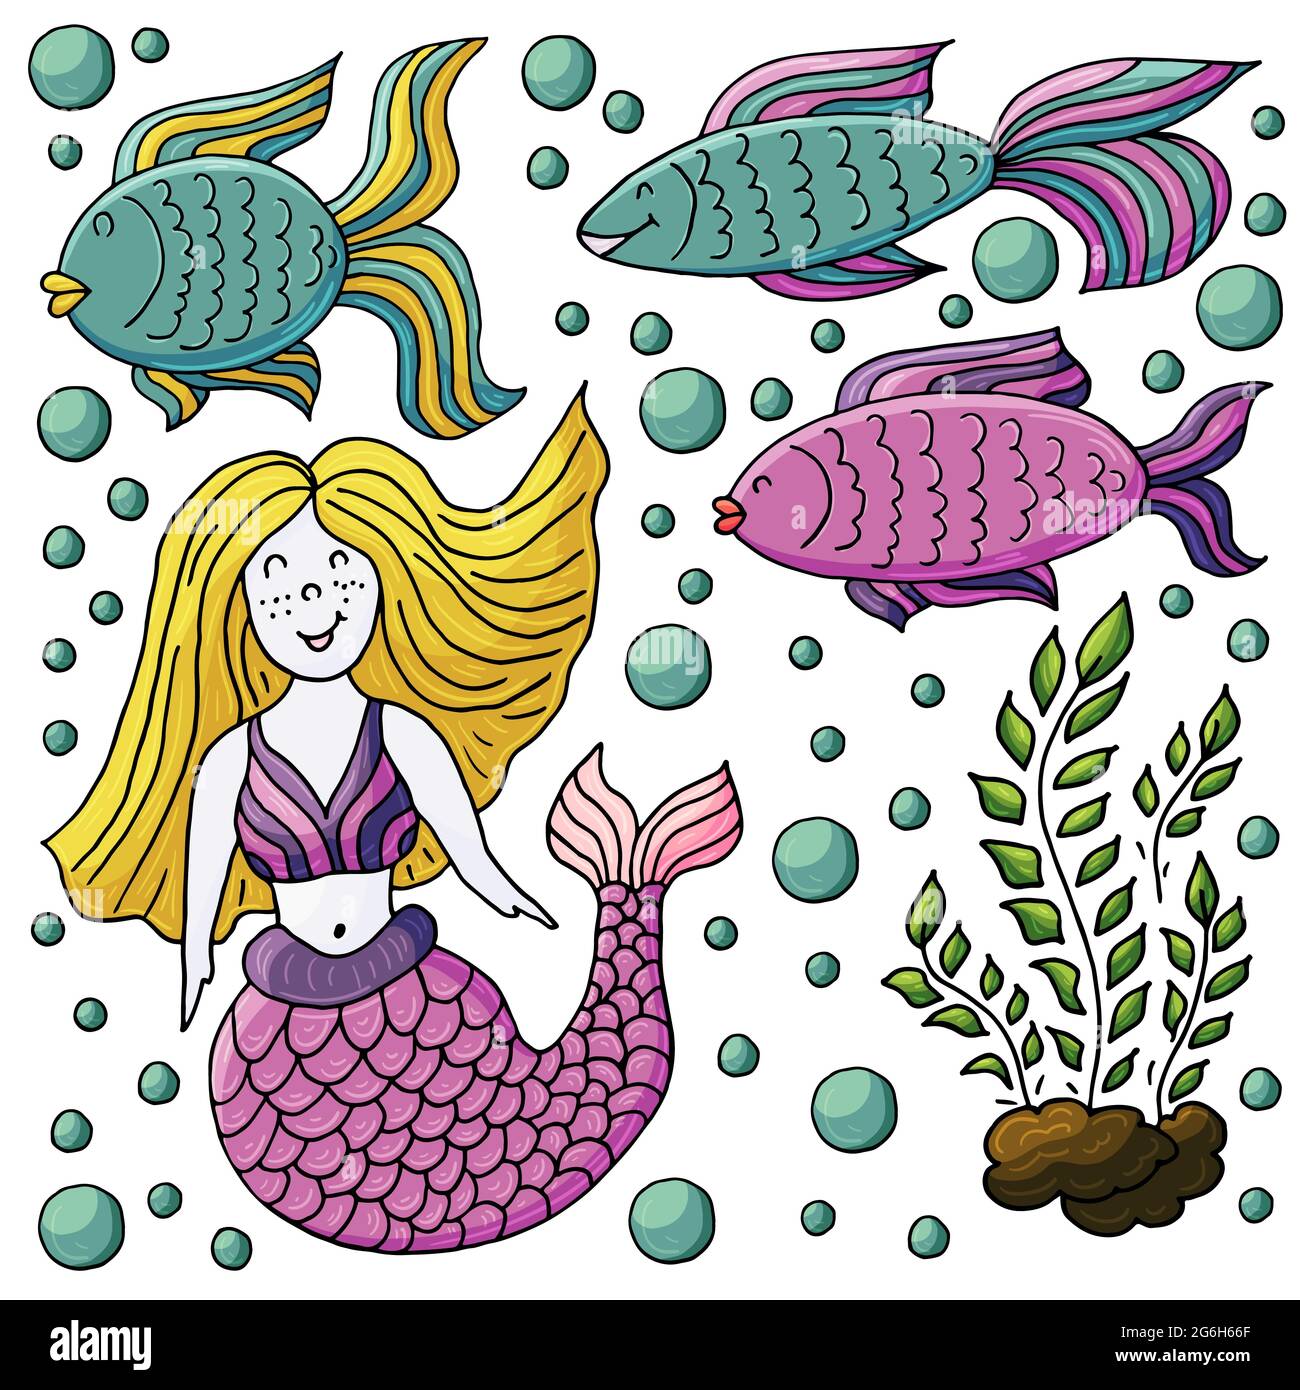 Vector illustration, ocean, underwater world, marine clipart. Set of Cartoon characters for cards, flyers, banners, children's books. Print for t-shir Stock Vector